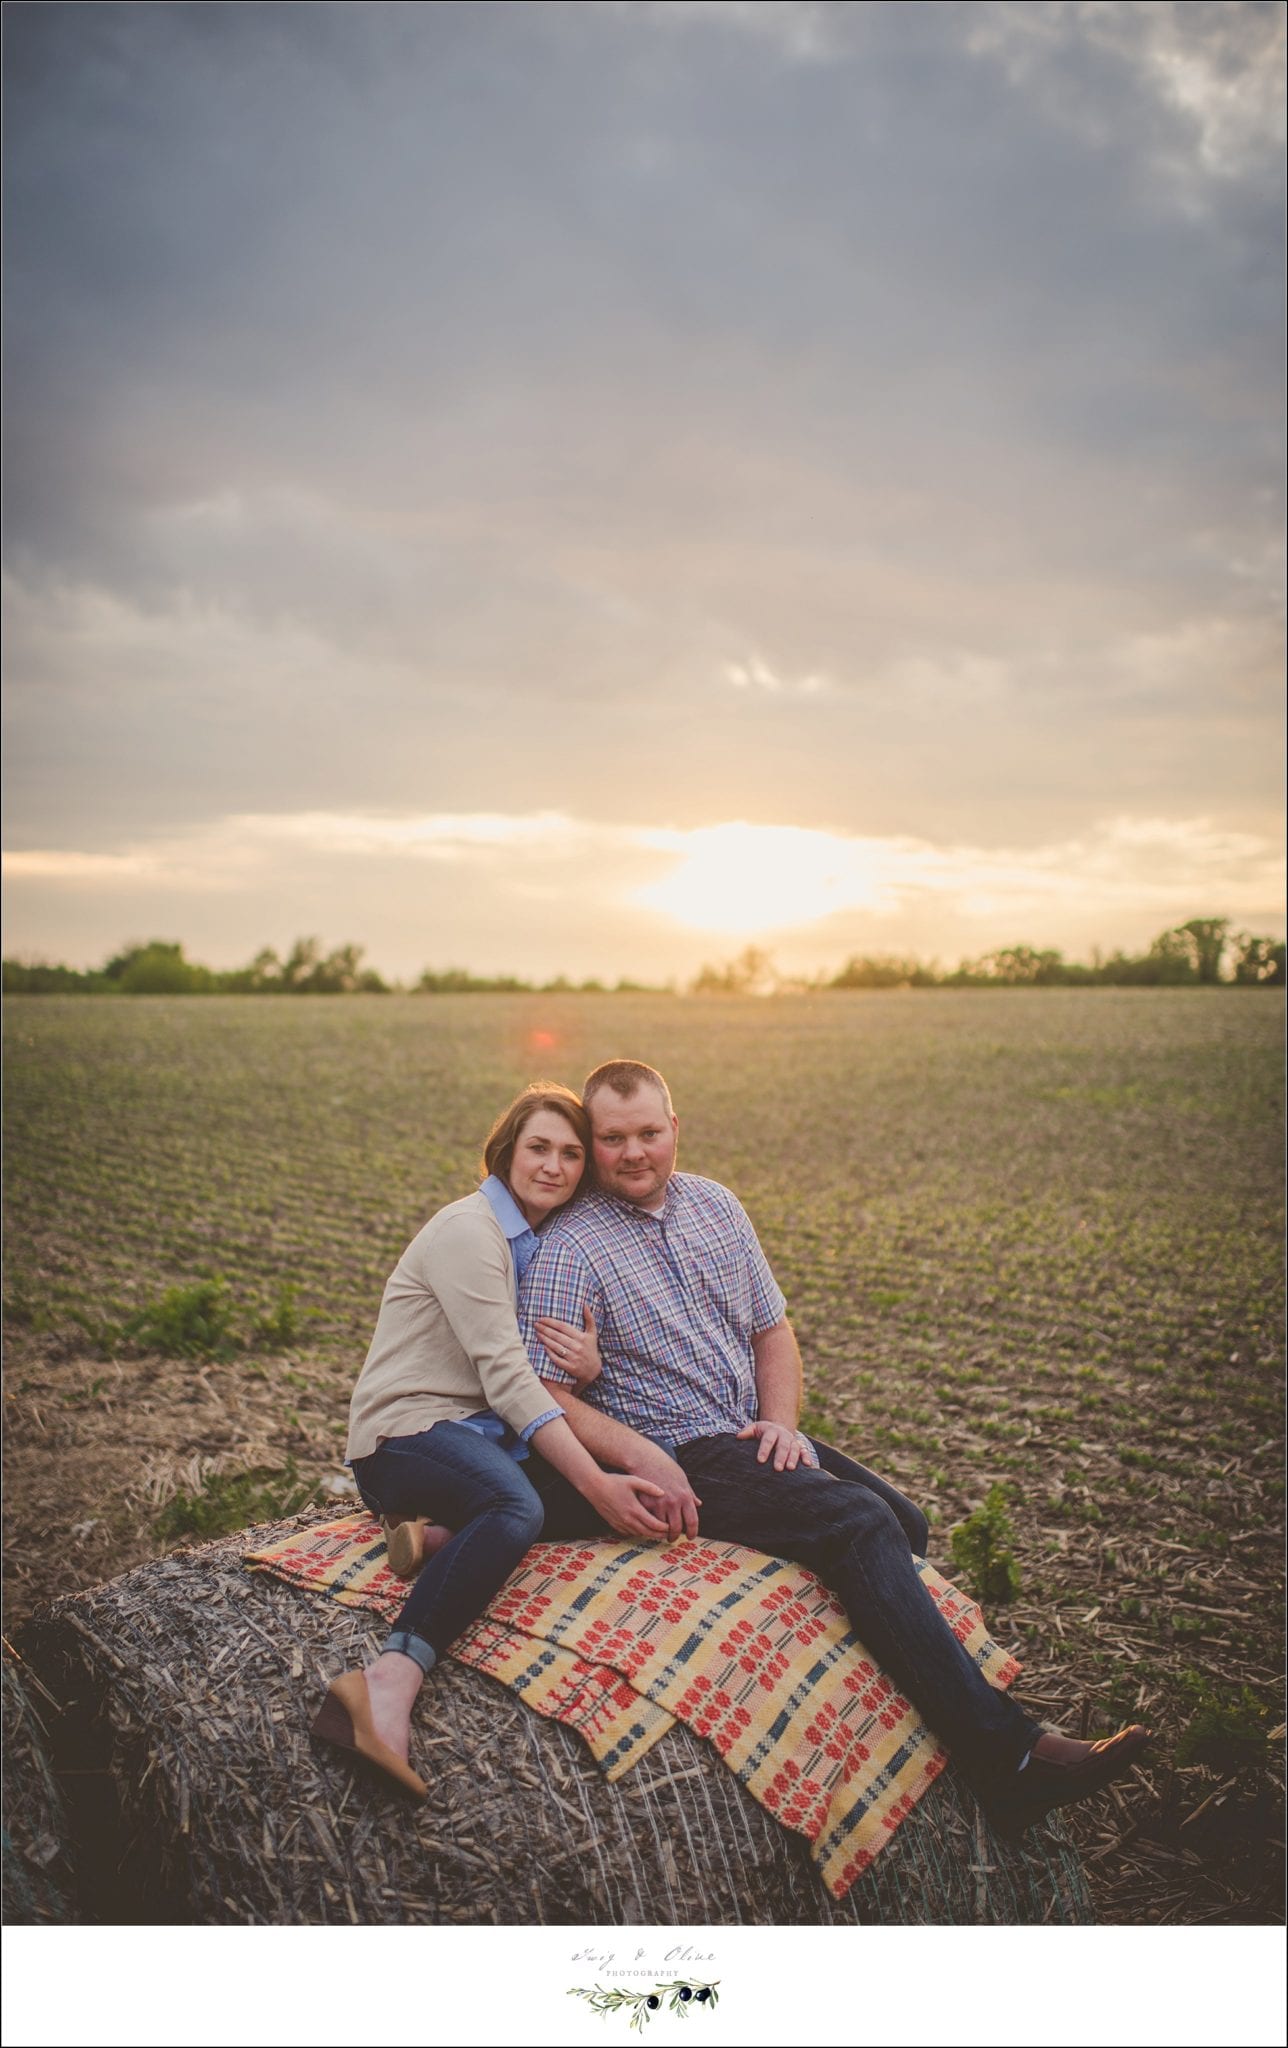 Round bales, sunsets, blankets, picnics, love, life, happiness, engagement sessions, fields, outdoor sessions, perfect